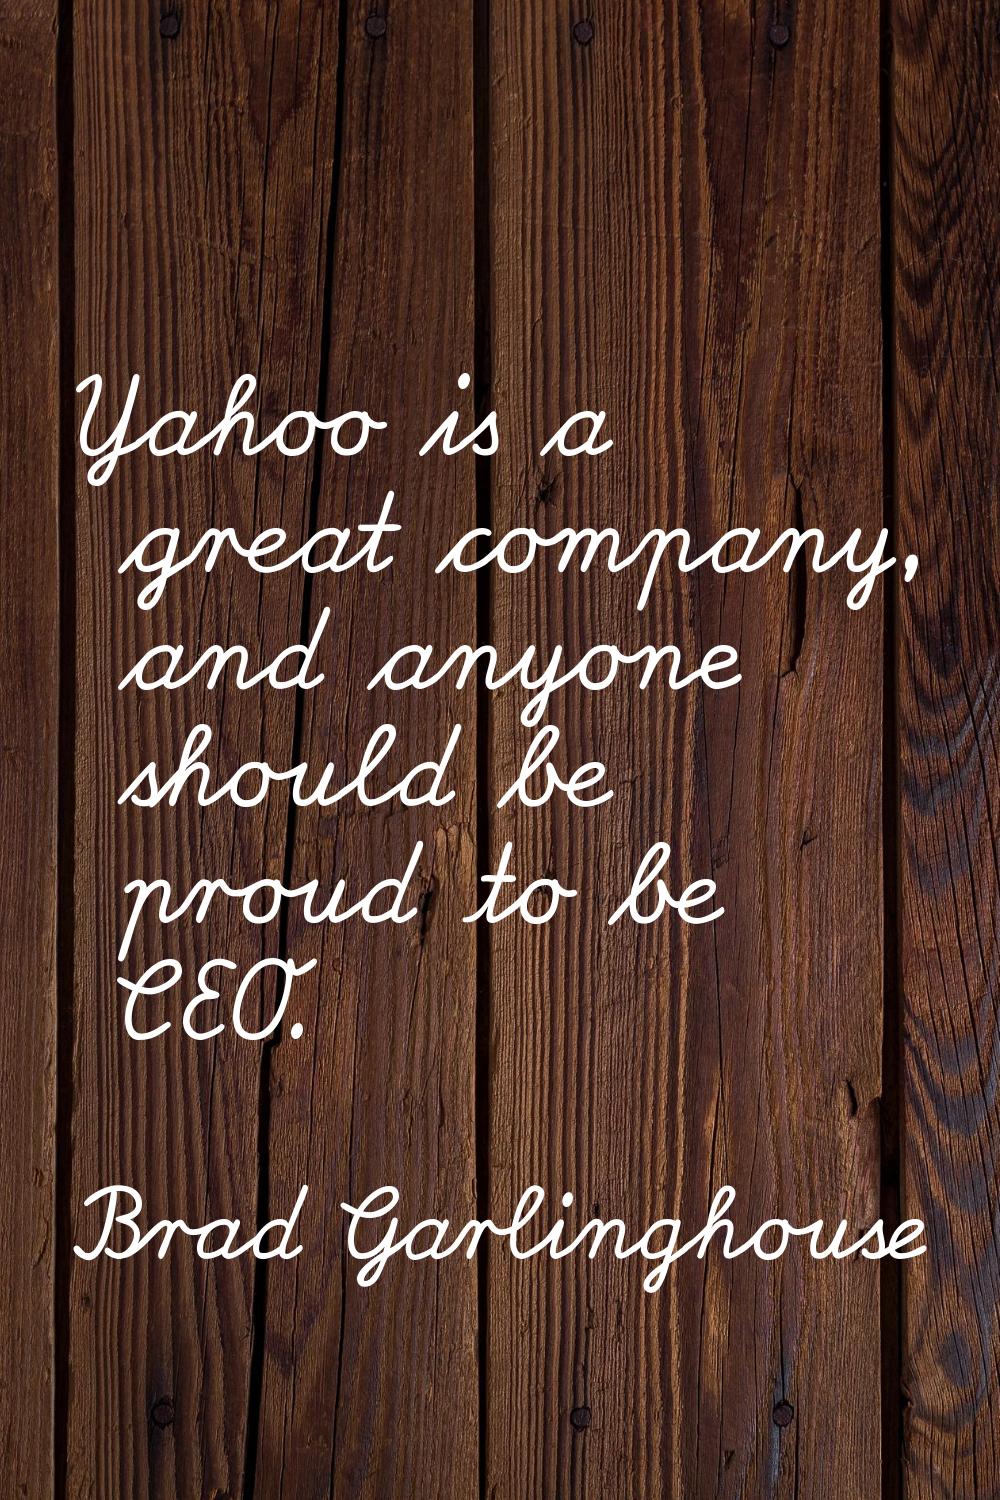 Yahoo is a great company, and anyone should be proud to be CEO.